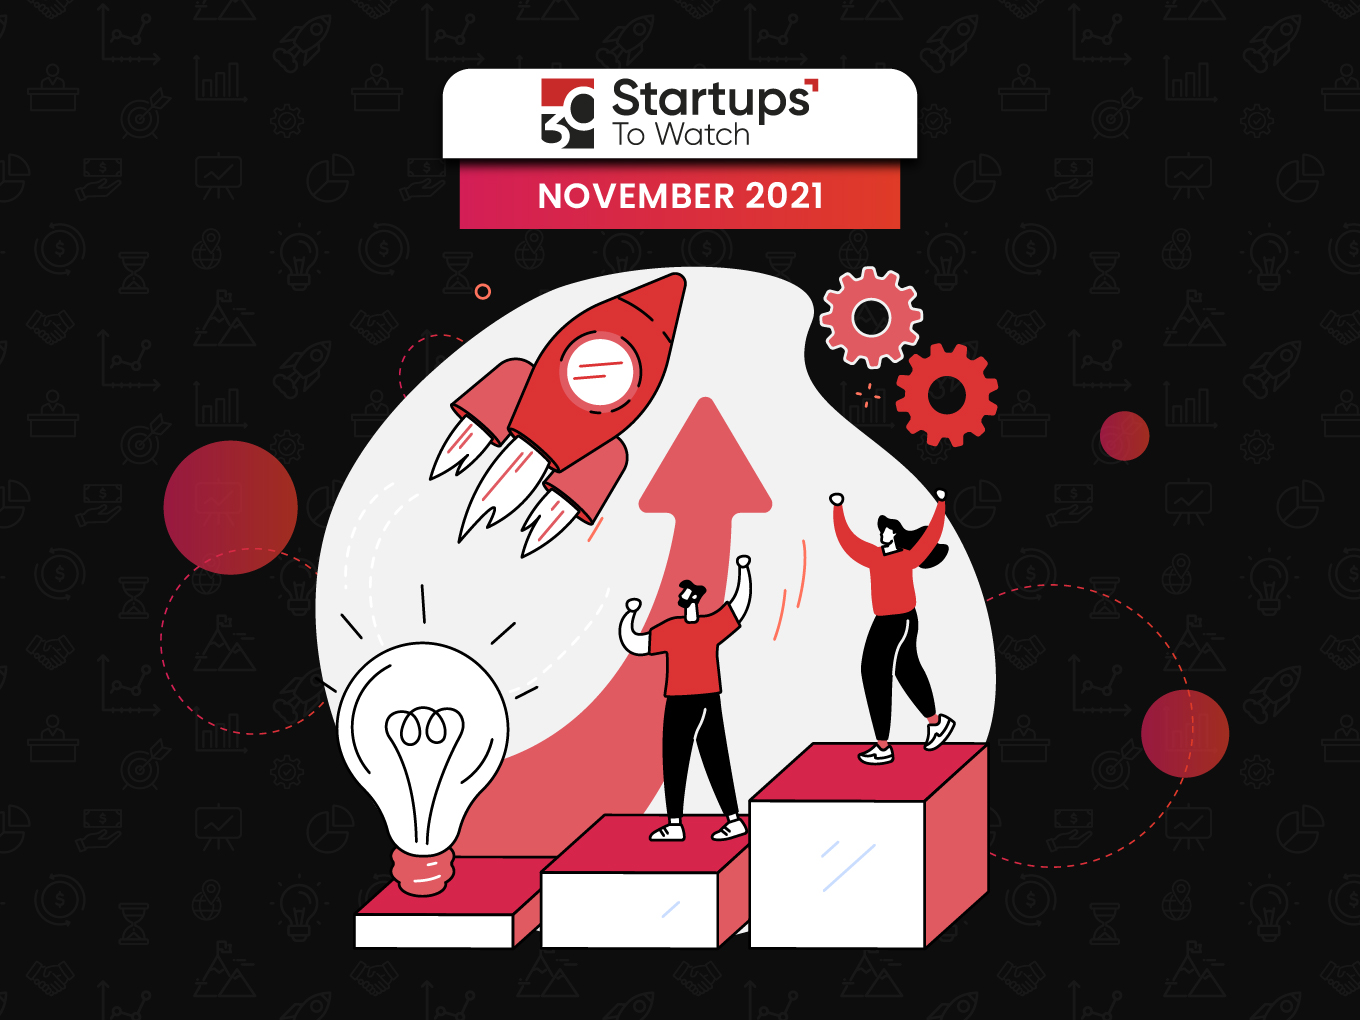 30 Startups To Watch: The Startups That Caught Our Eye In November 2021